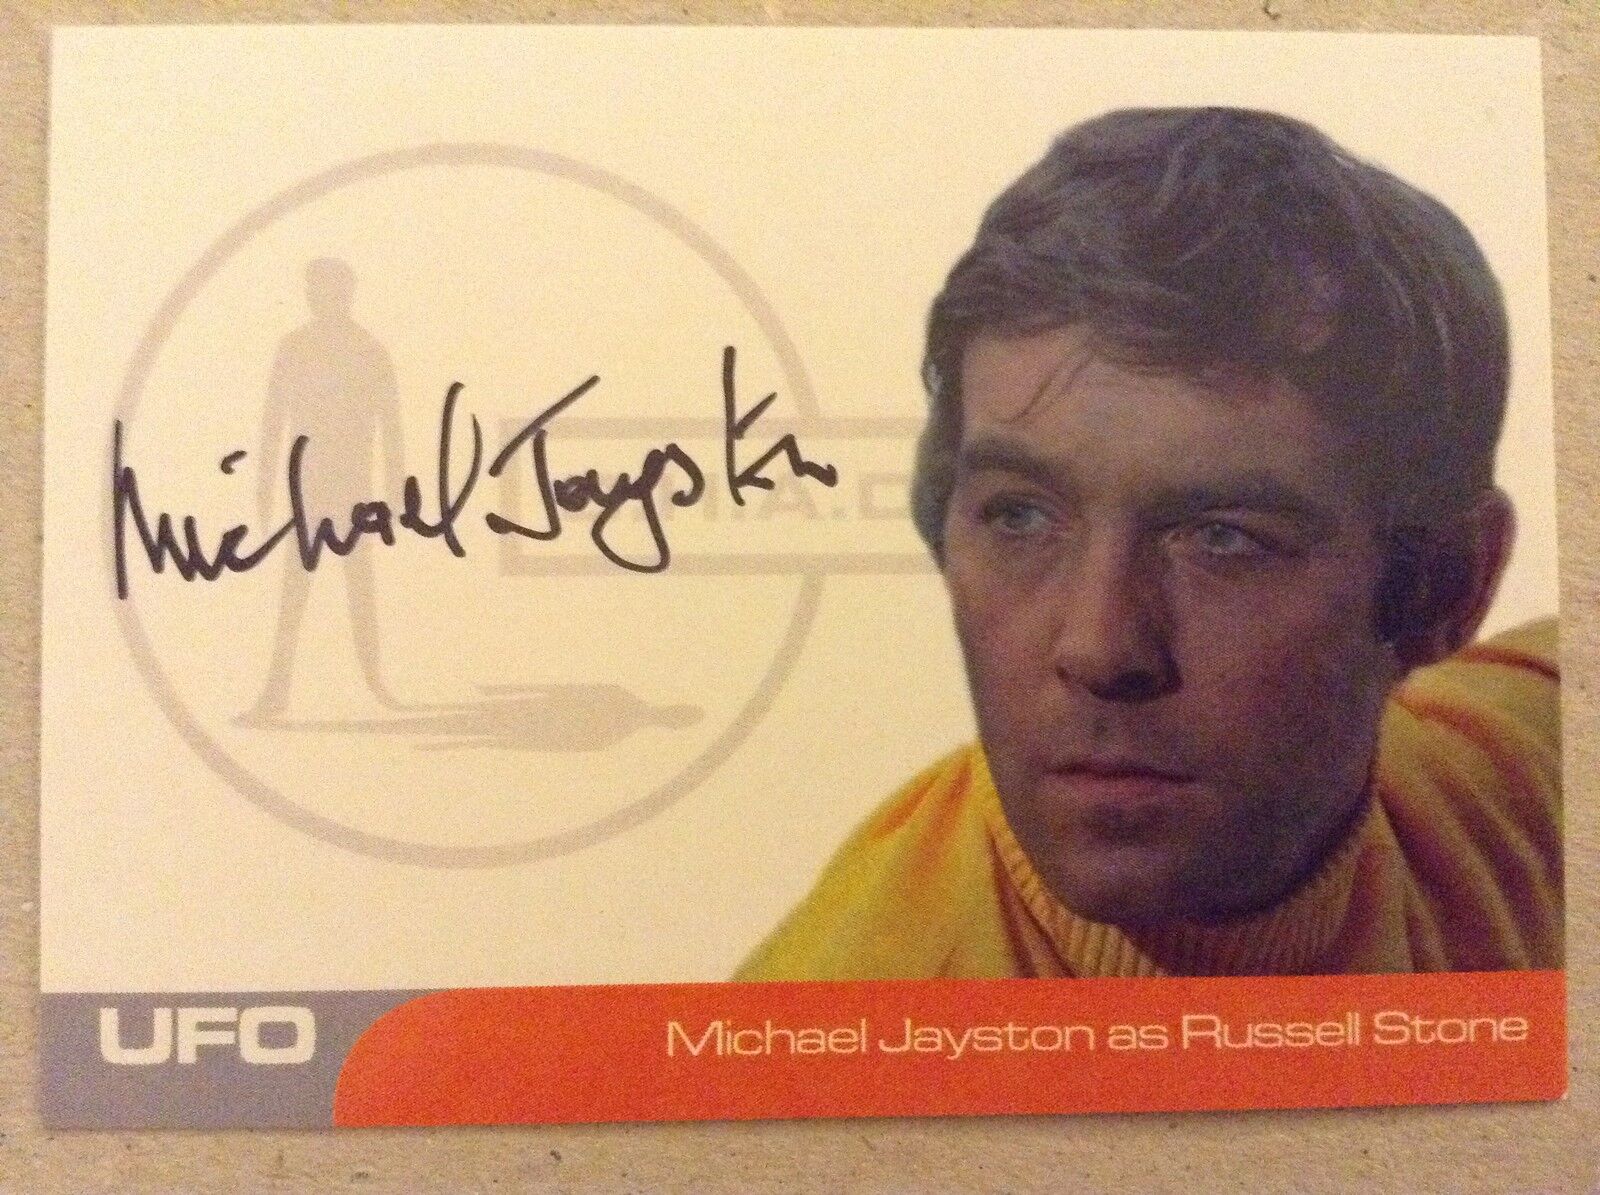 UFO: AUTOGRAPH CARD: MICHAEL JAYSTONE AS RUSSELL STONE MJ2